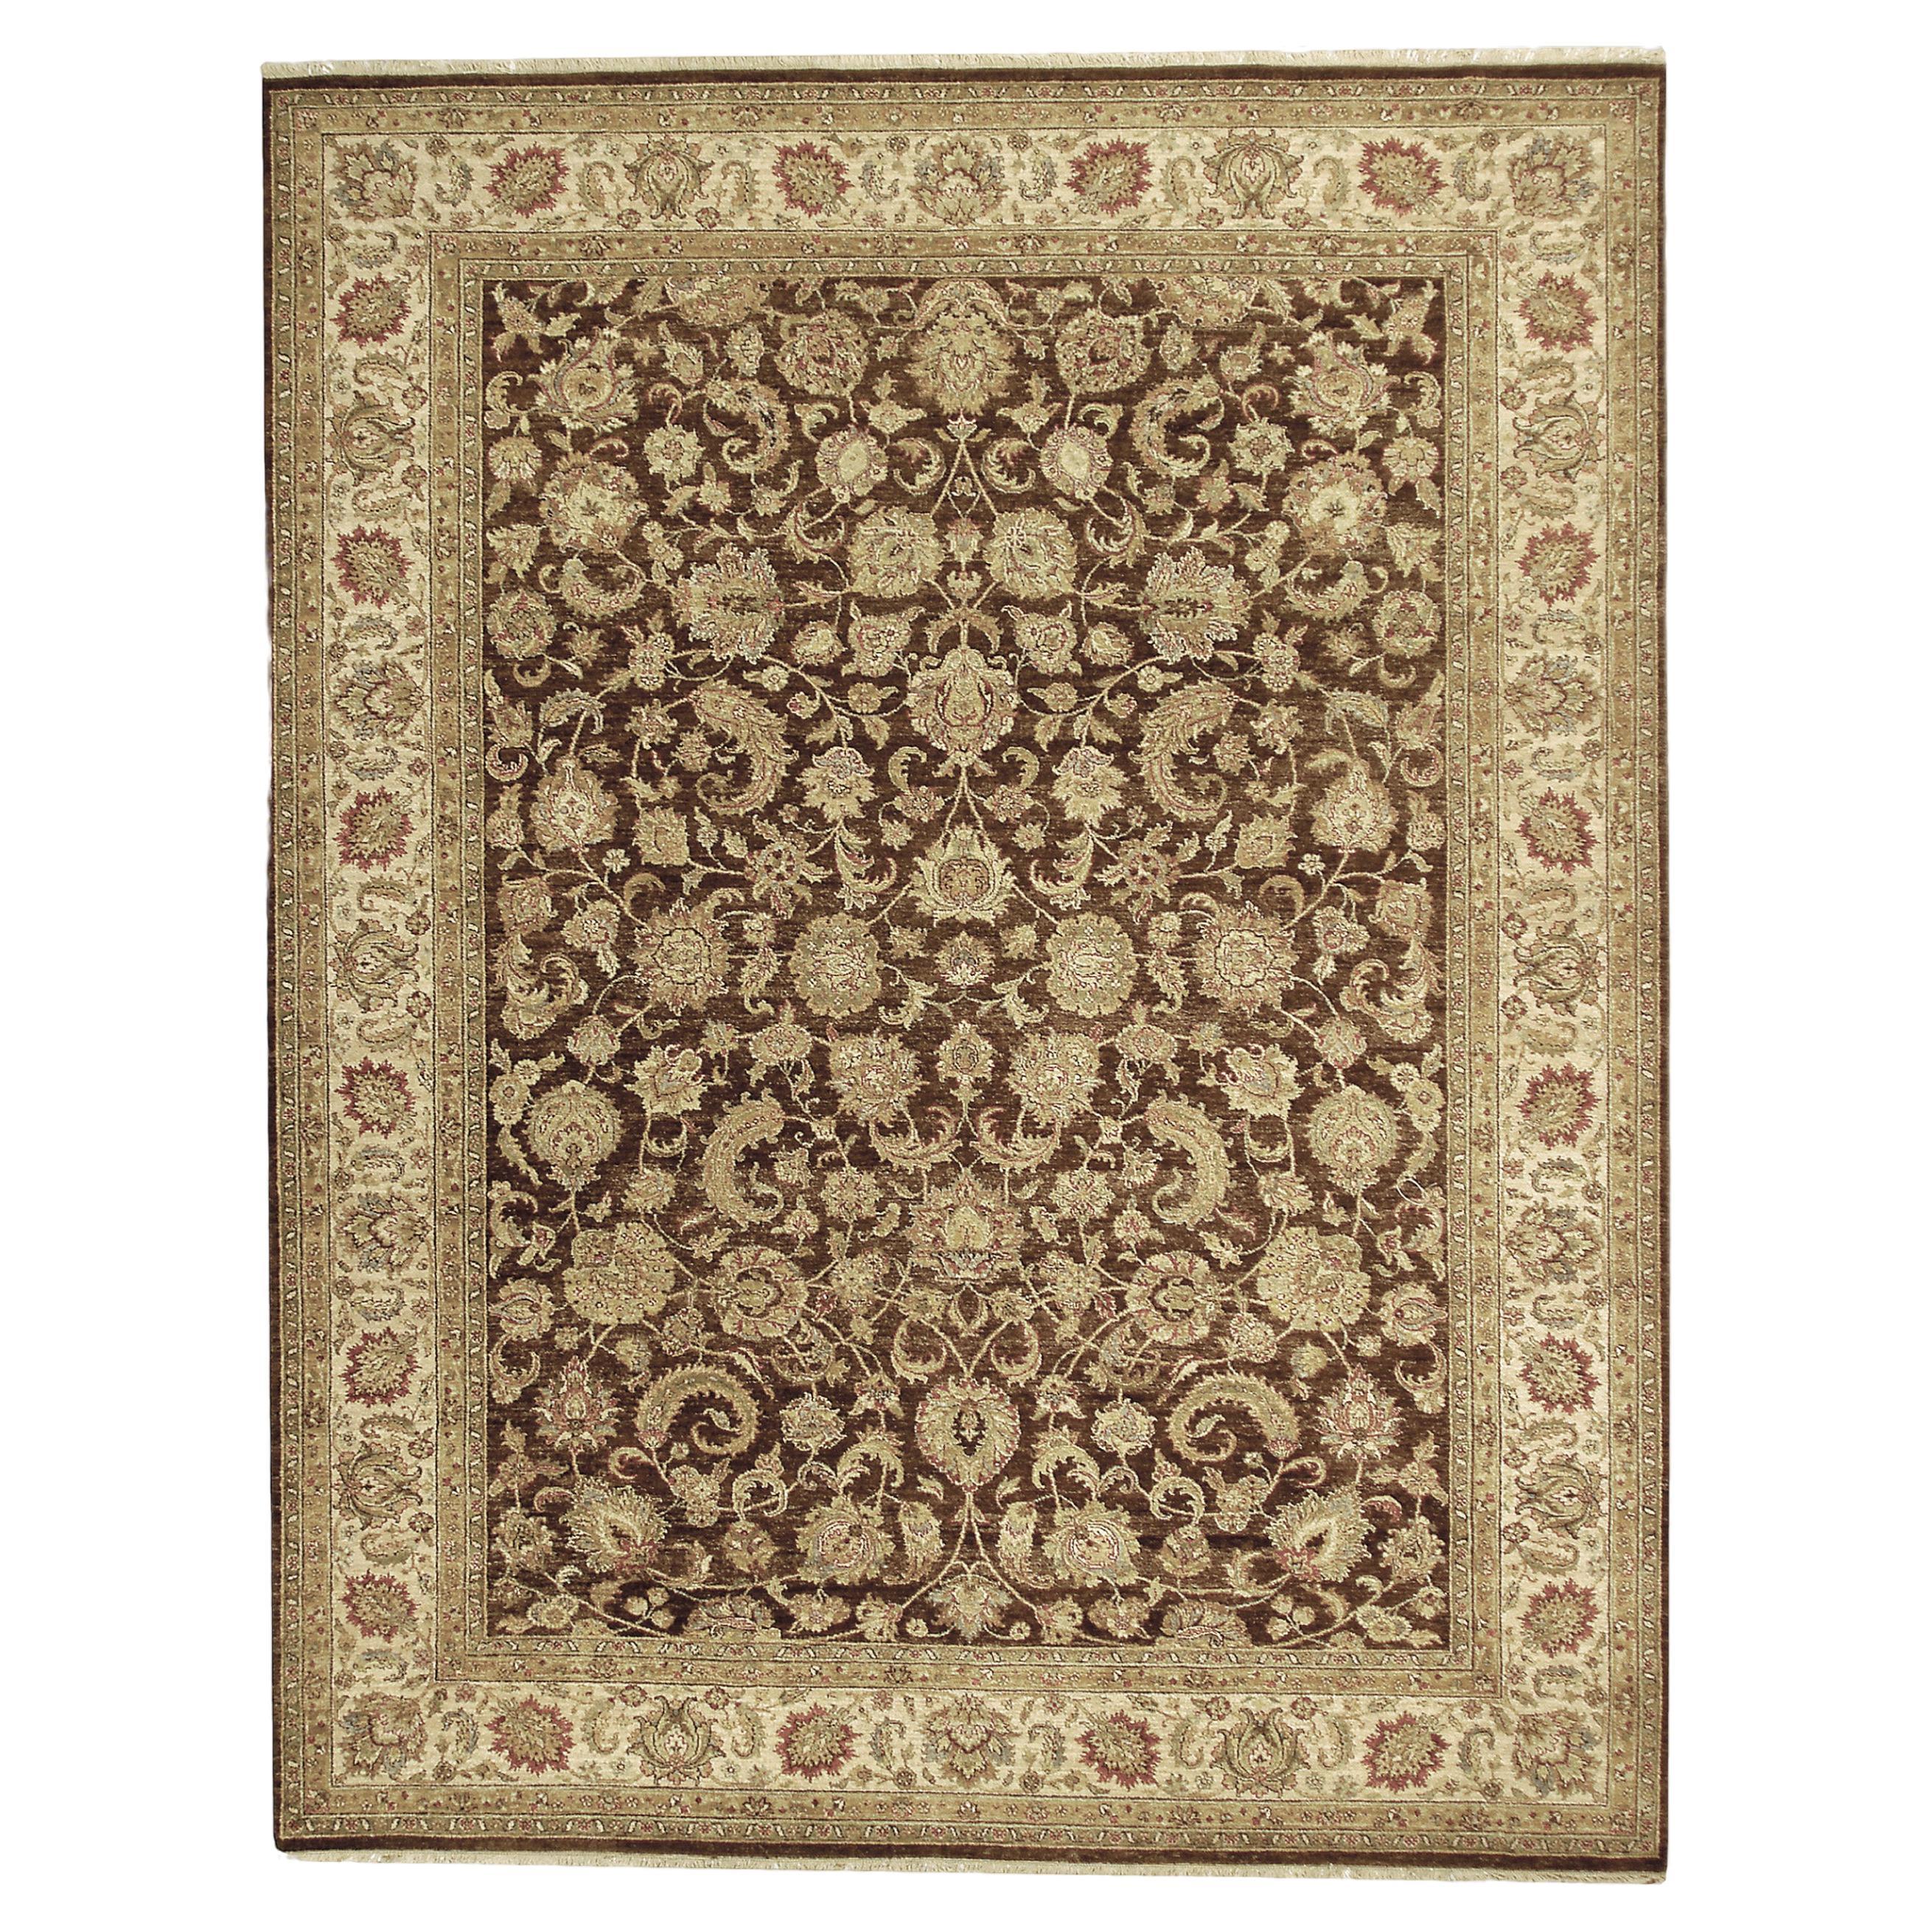 Luxury Traditional Hand-Knotted Brown/Cream 12x18 Rug